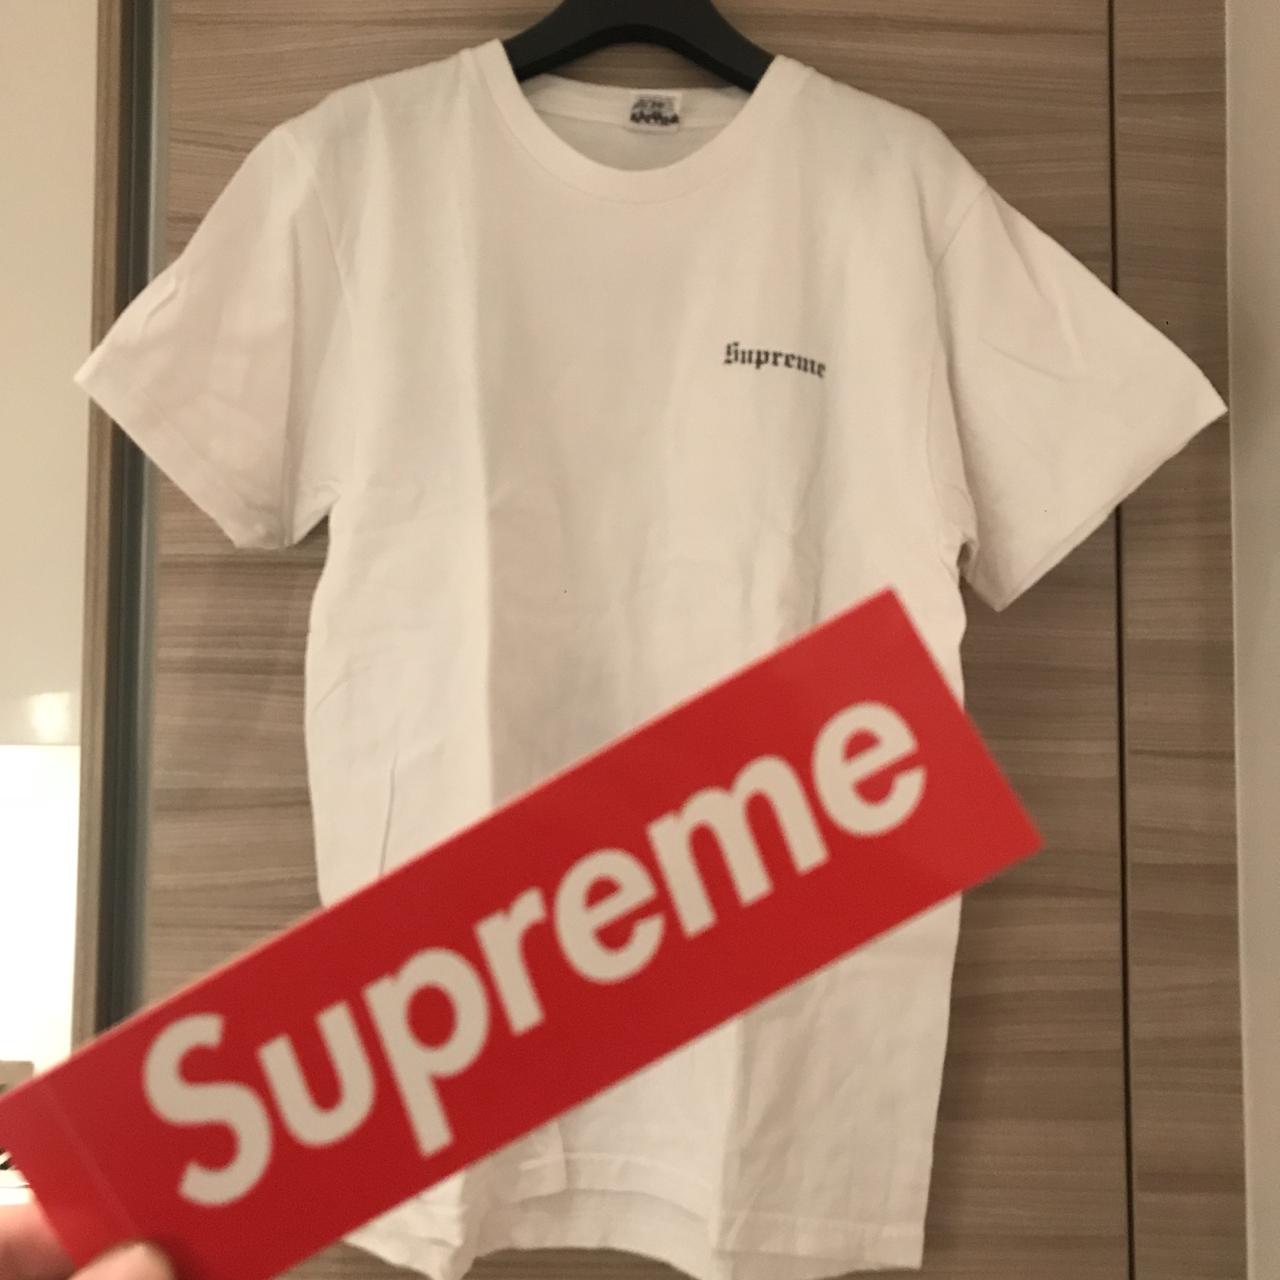 Supreme tee not sure what year. Size M 8/10 condt... - Depop